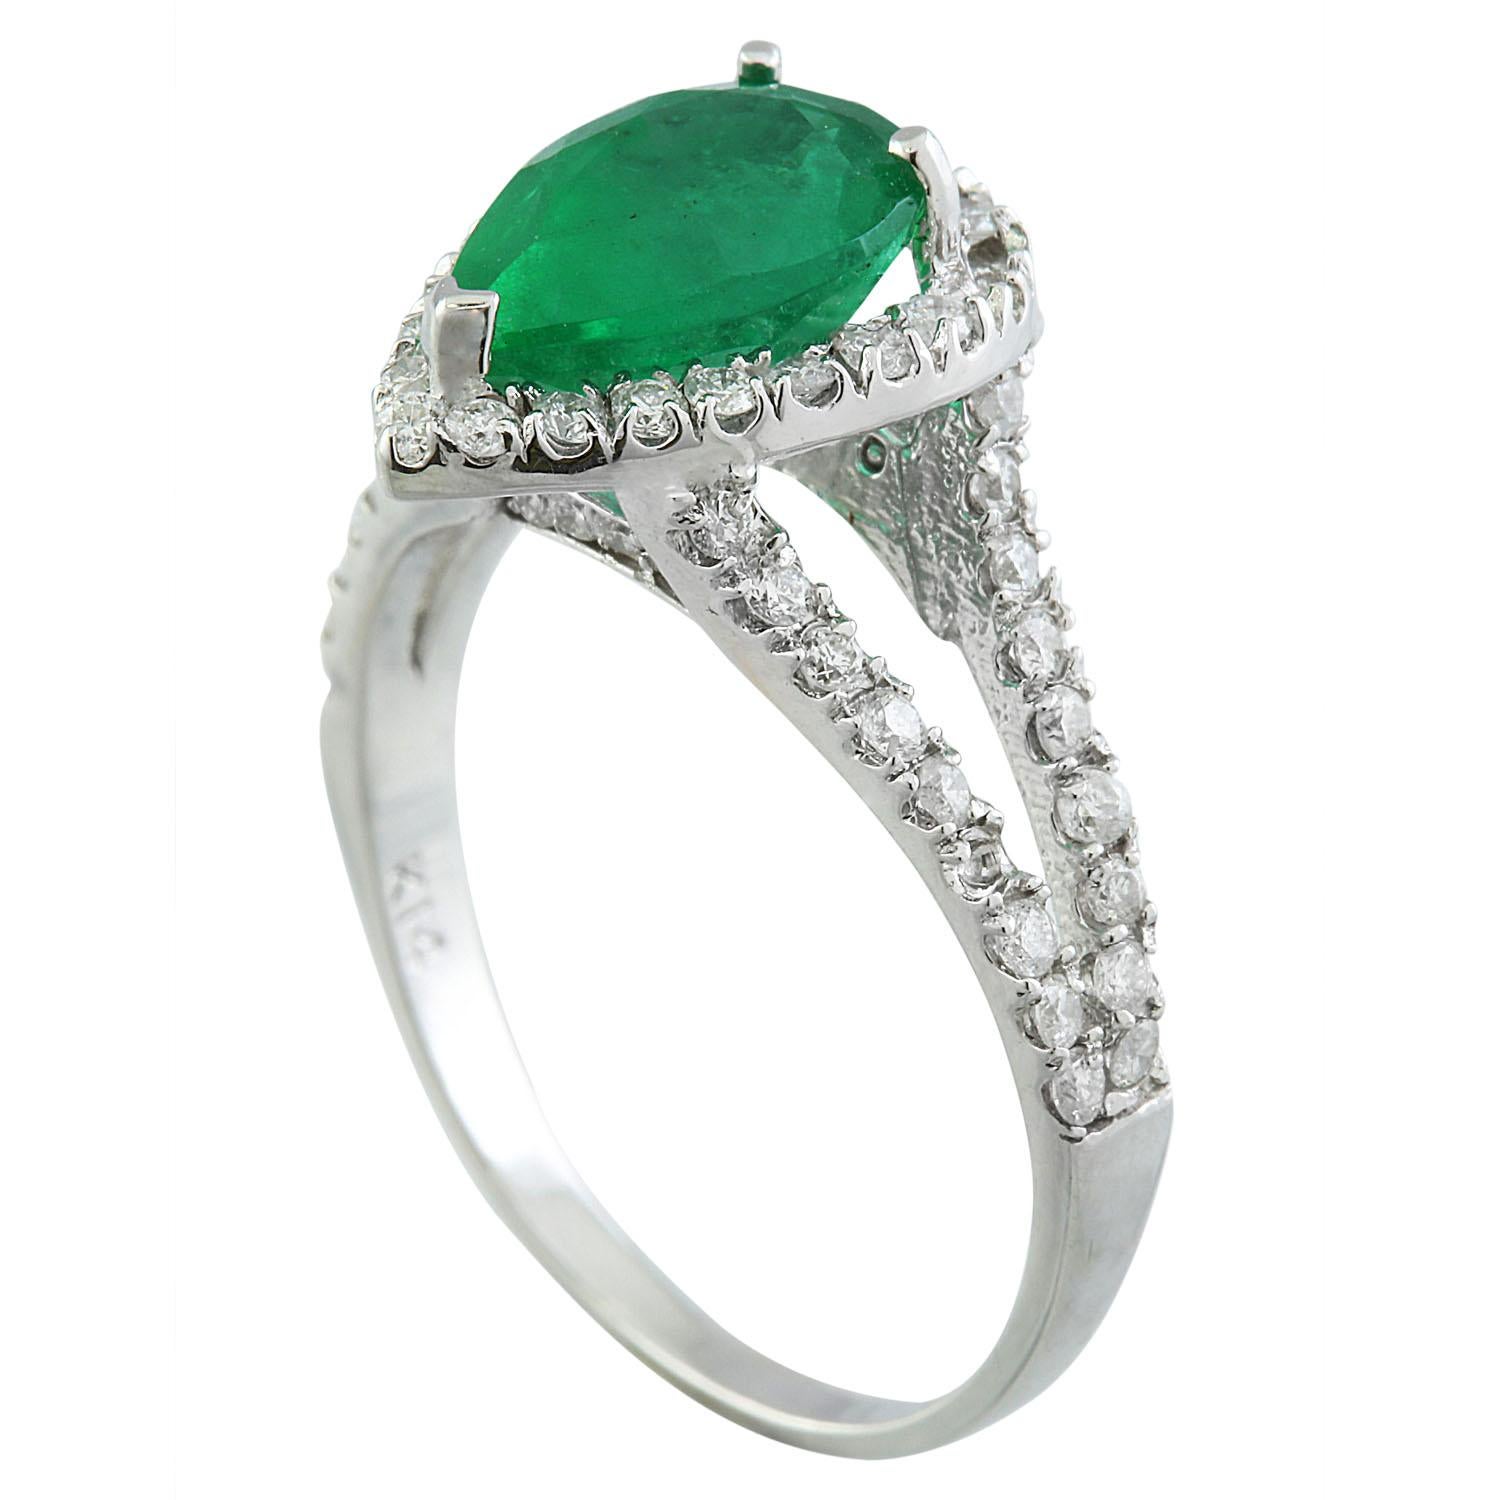 2.65 Carat Natural Emerald 14 Karat Solid White Gold Diamond Ring
Stamped: 14K 
Ring Size: 7 
Total Ring Weight: 3.2 Grams 
Emerald Weight: 2.10 Carat (10.00x6.50 Millimeter) 
Diamond Weight: 0.55 Carat (F-G Color, VS2-SI1 Clarity) 
Quantity: